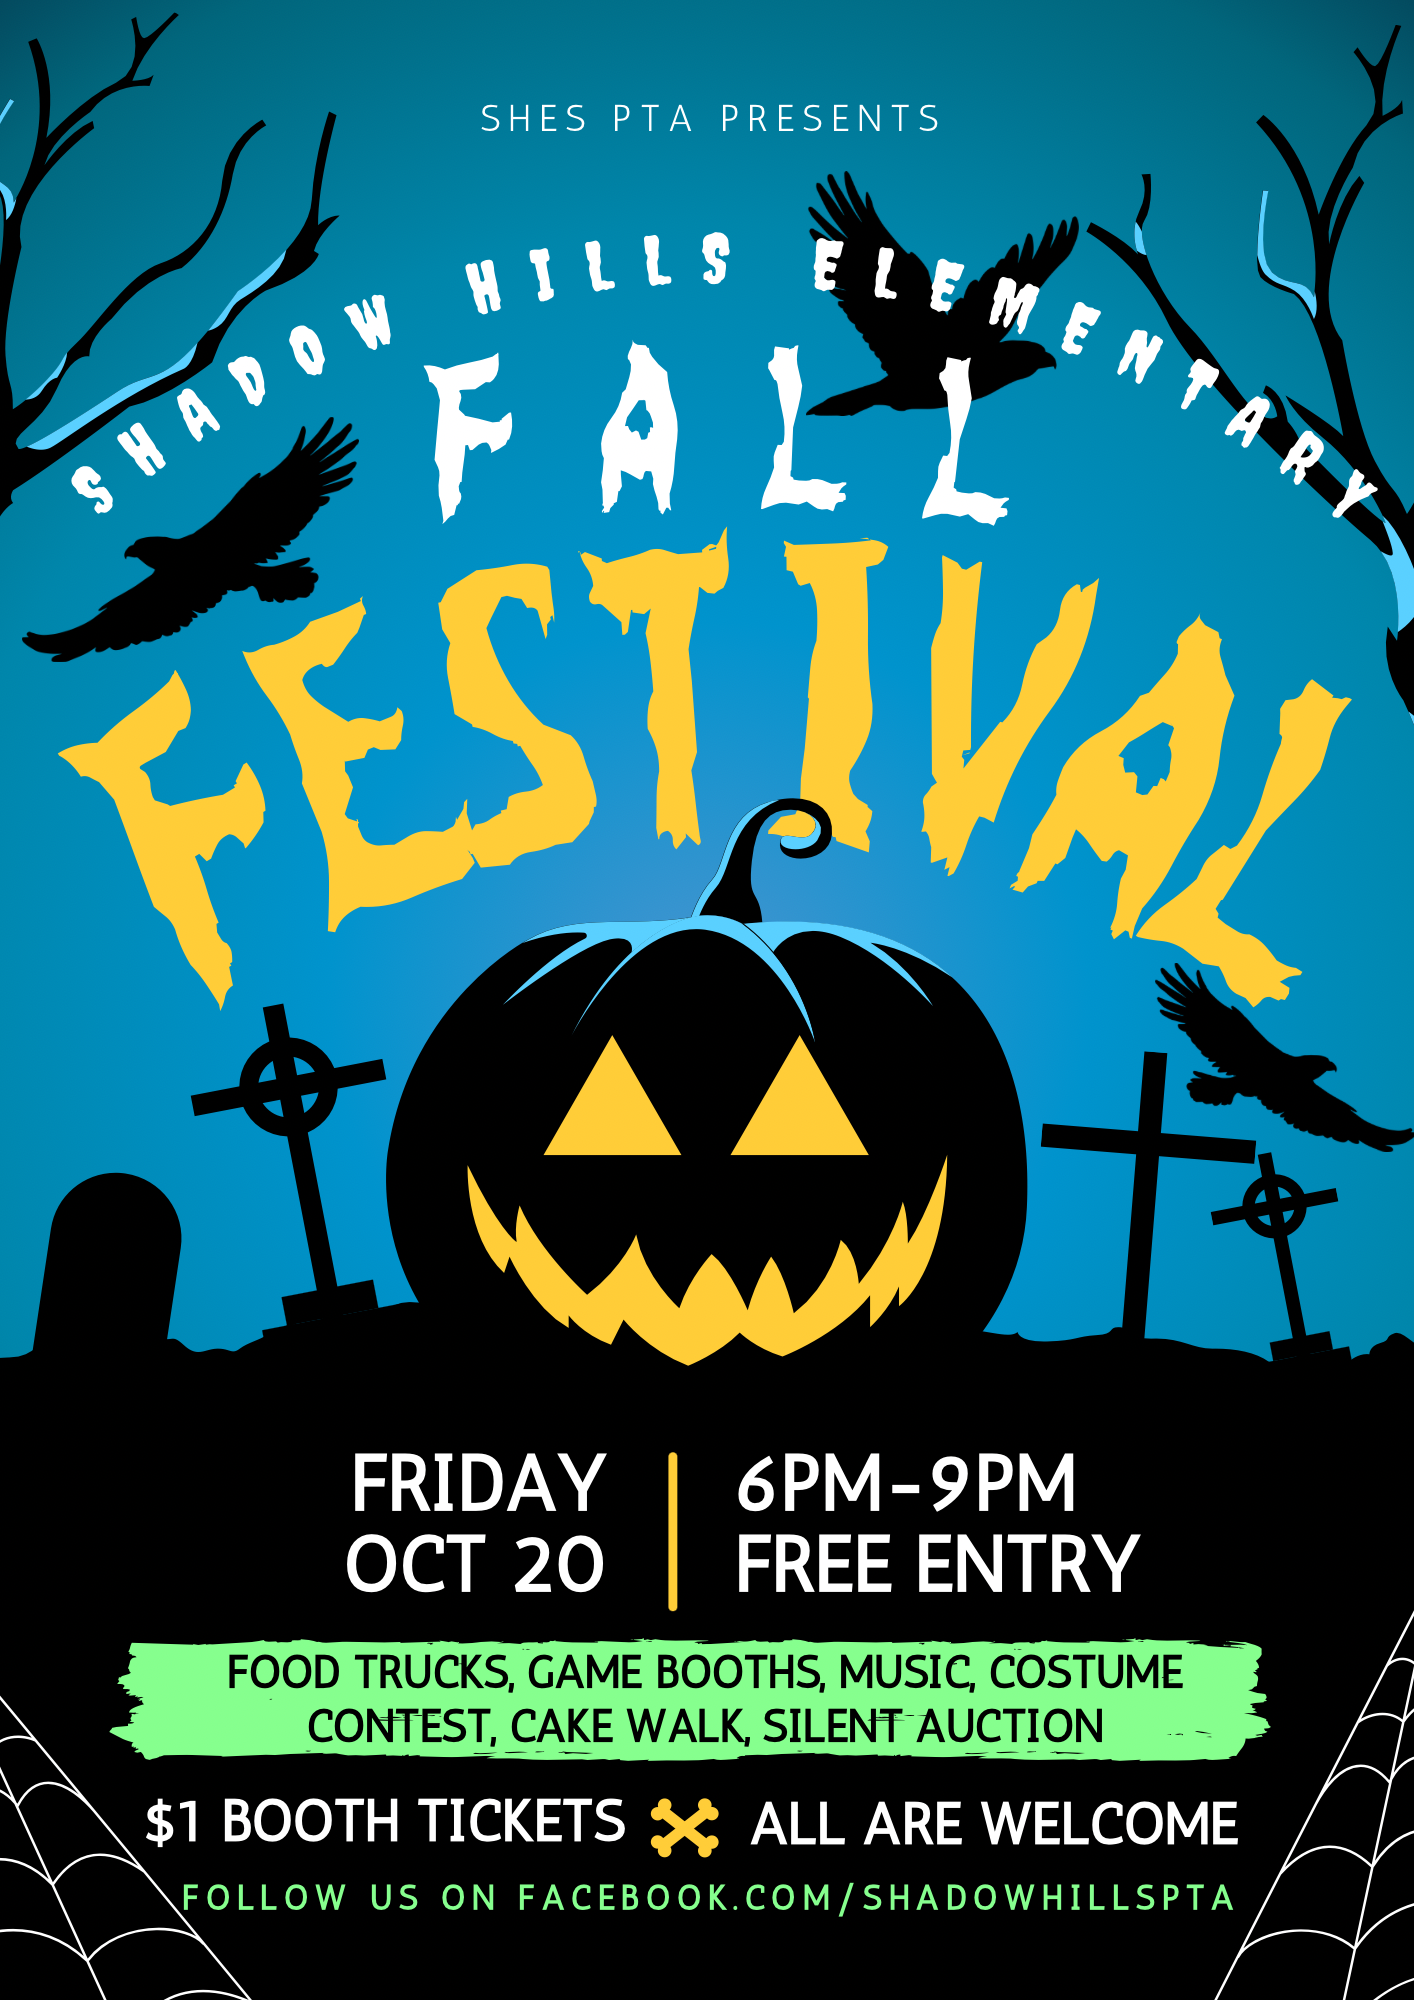 Don't miss our Fall Festival on Friday, Oct. 20th at 6:00pm!